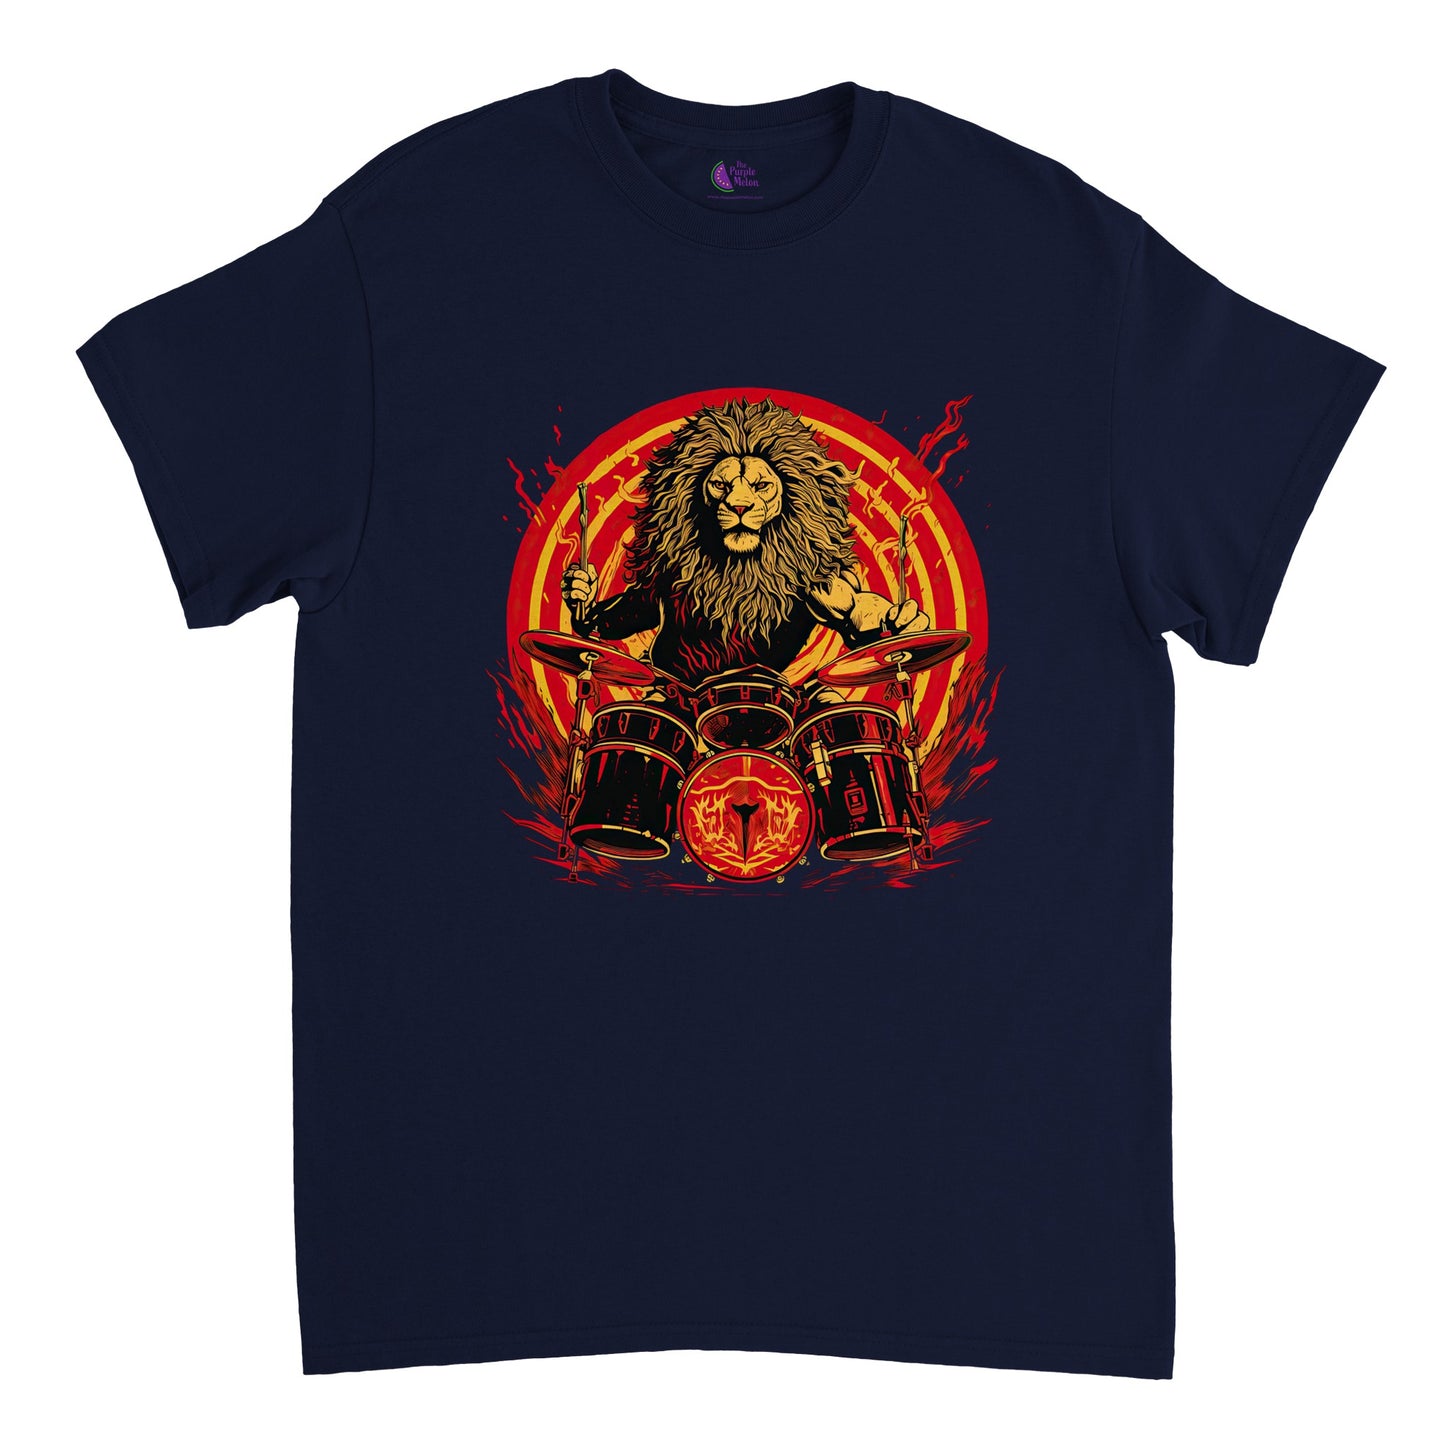 Navy blue t-shirt with lion drummer print